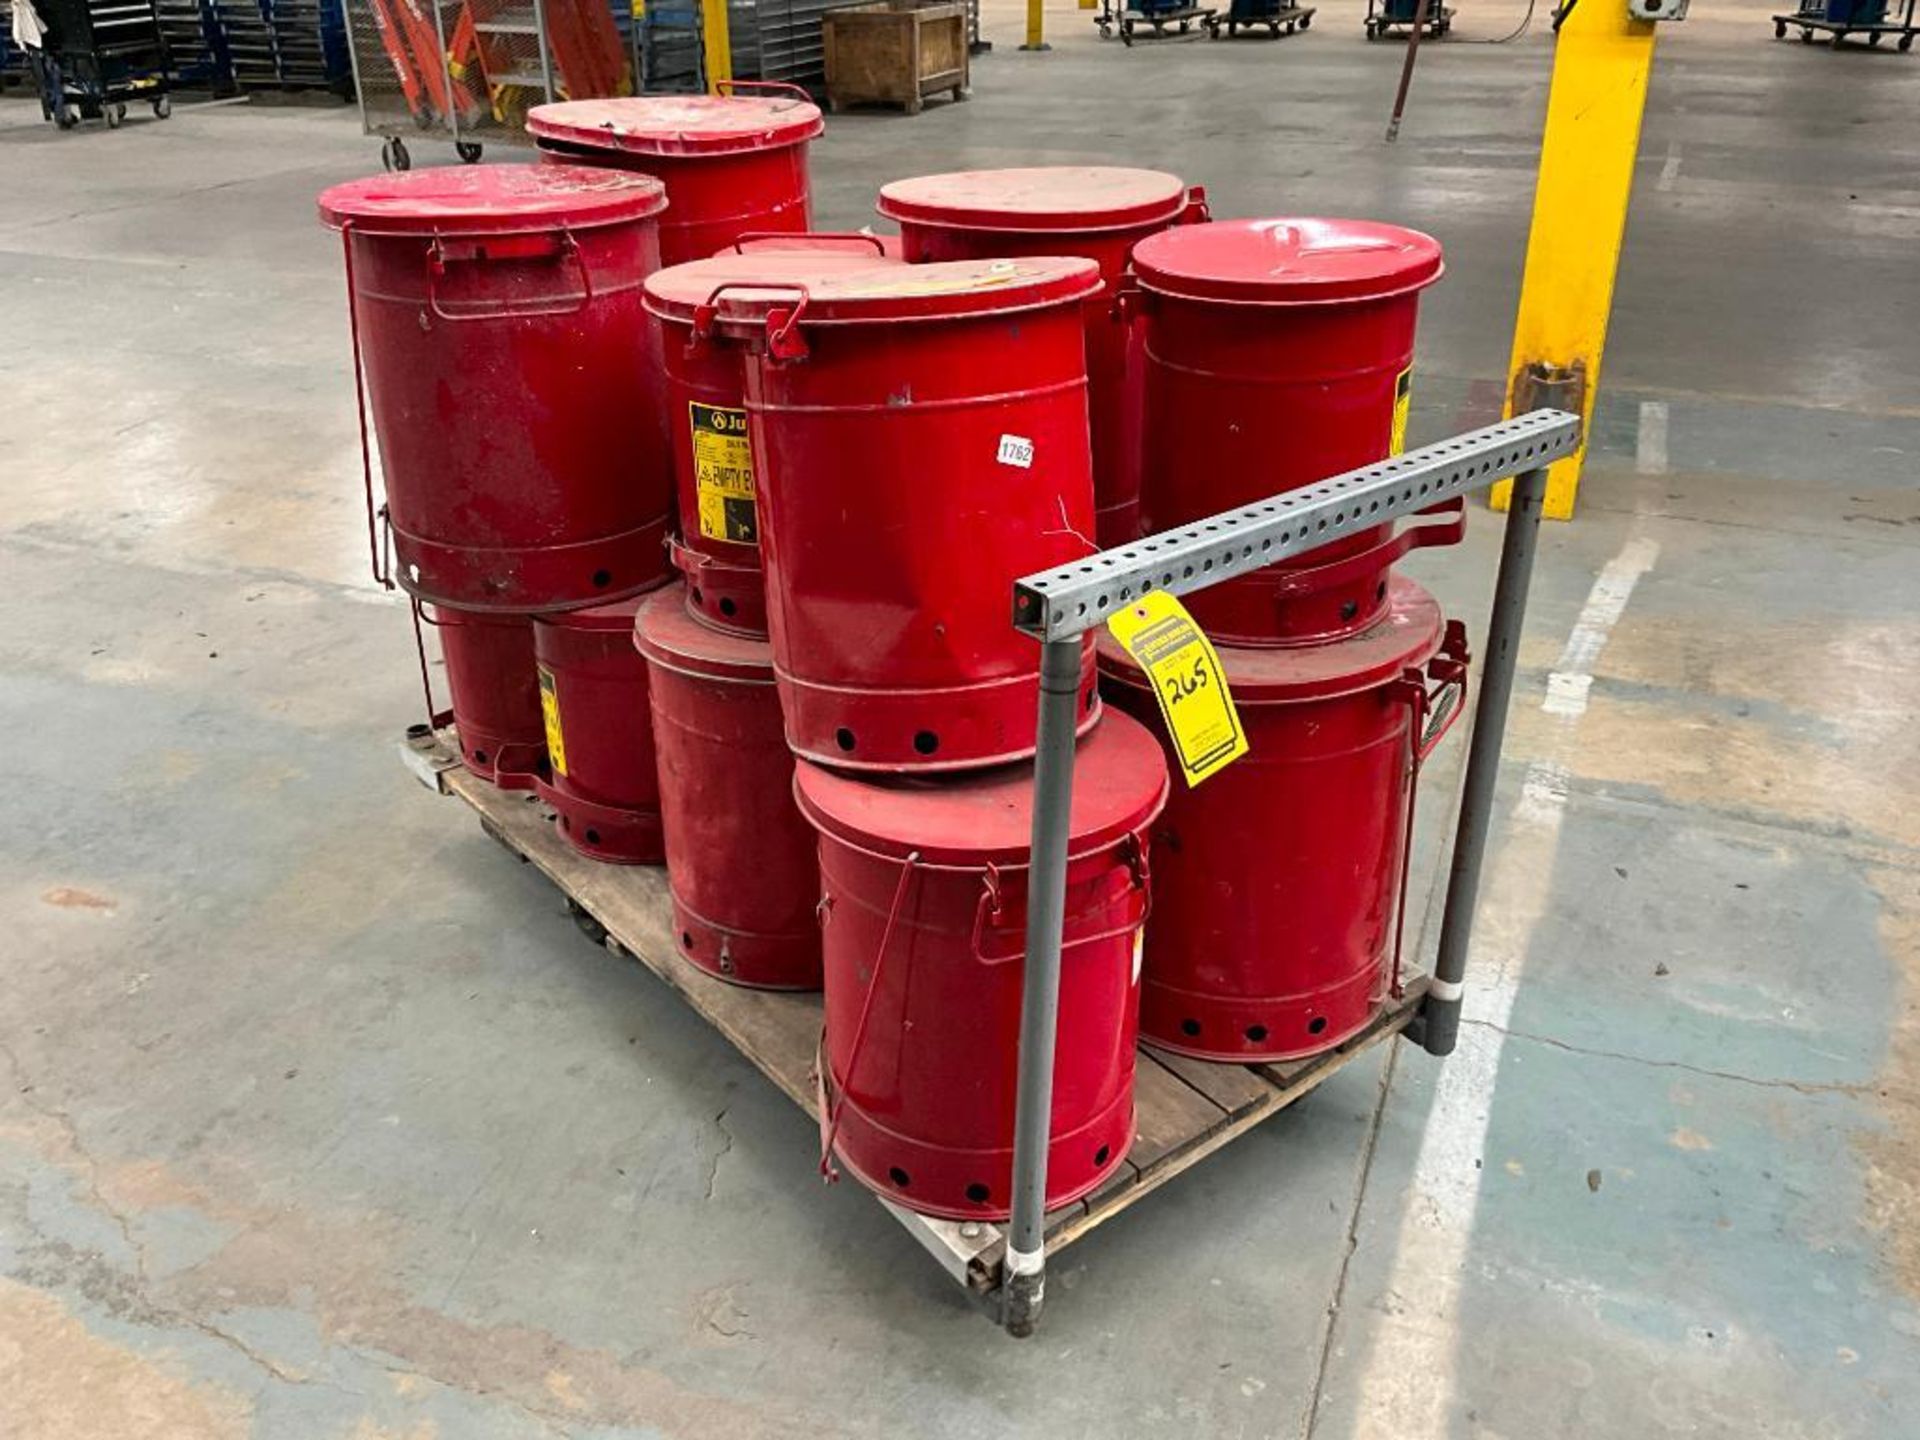 (16) Justrite Oily Waste Cans, (7) Model 09100 & (9) Model 09500